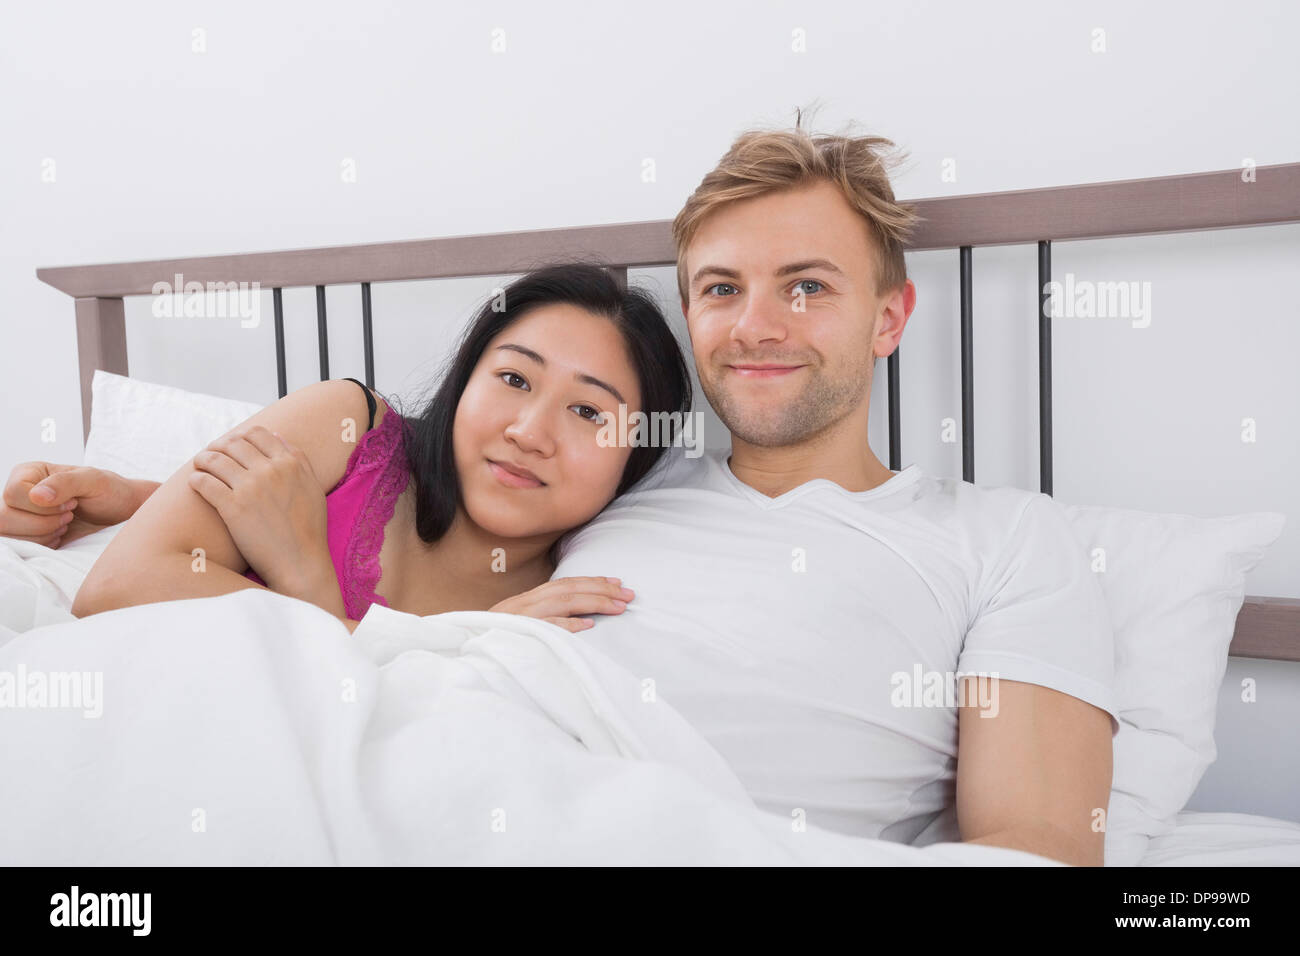 Portrait of loving couple in bed Stock Photo